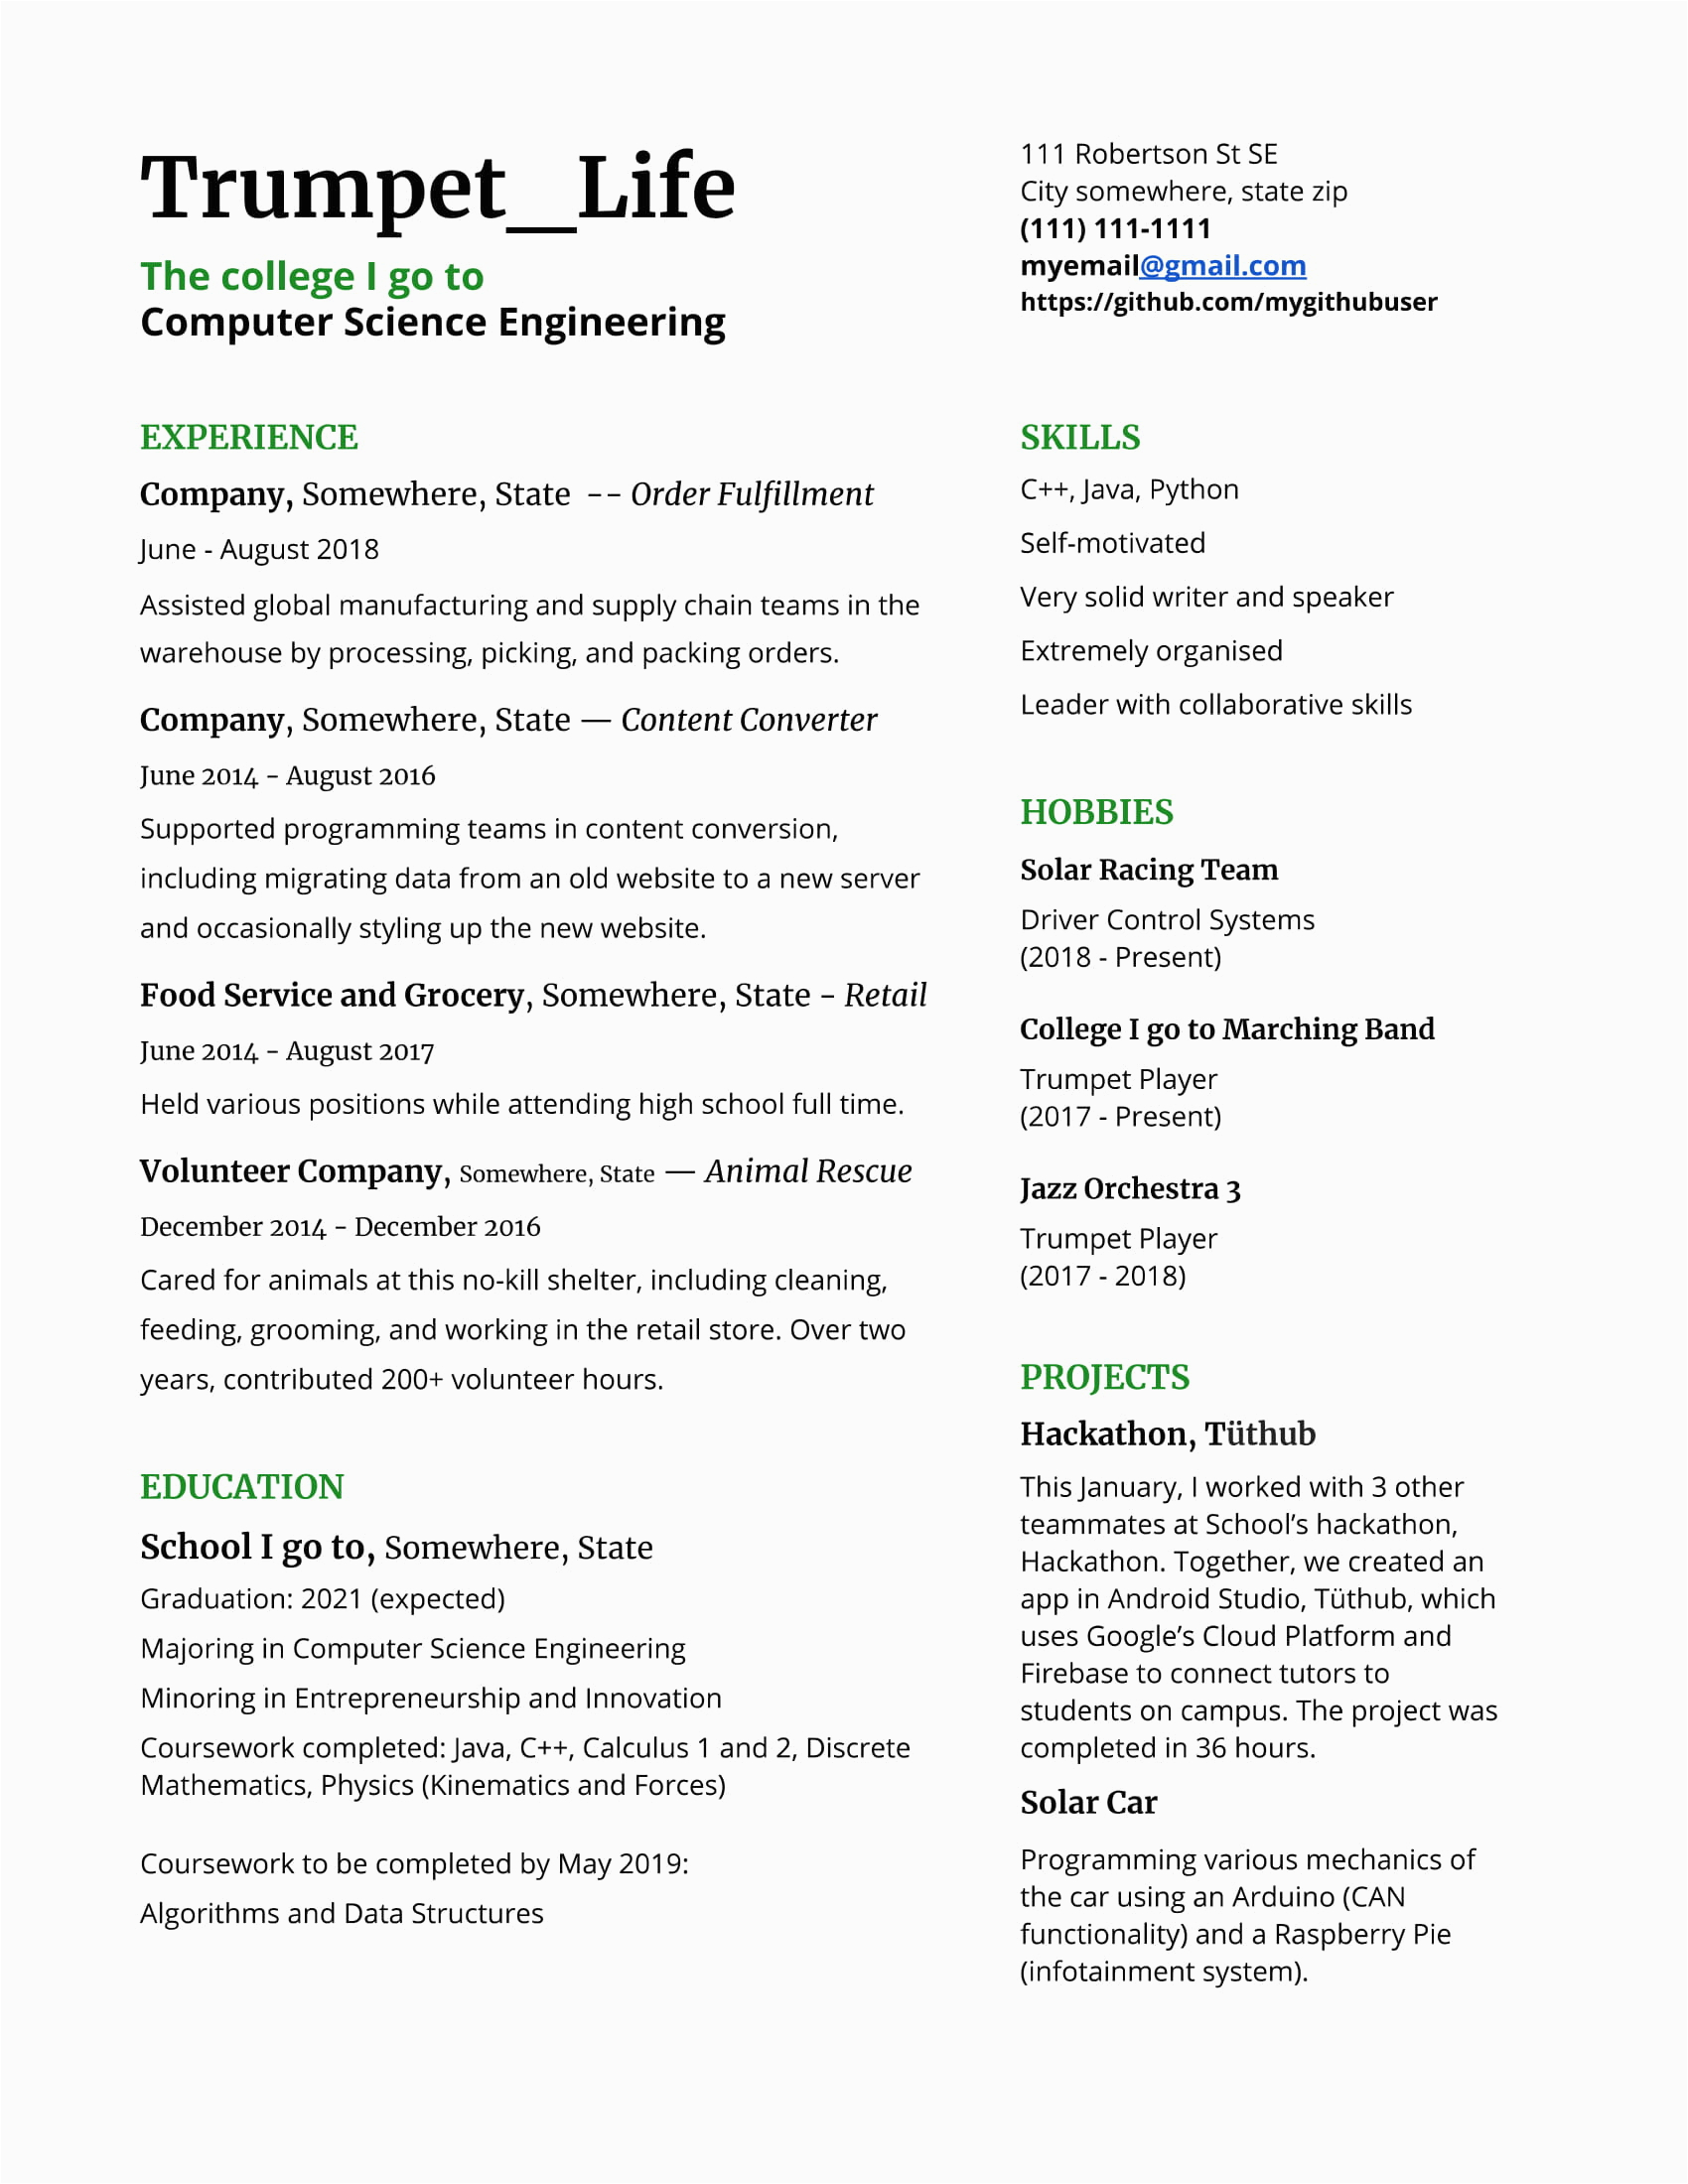 Sample Resume for sophomores In College sophomore In College Resume for Internships and A Career